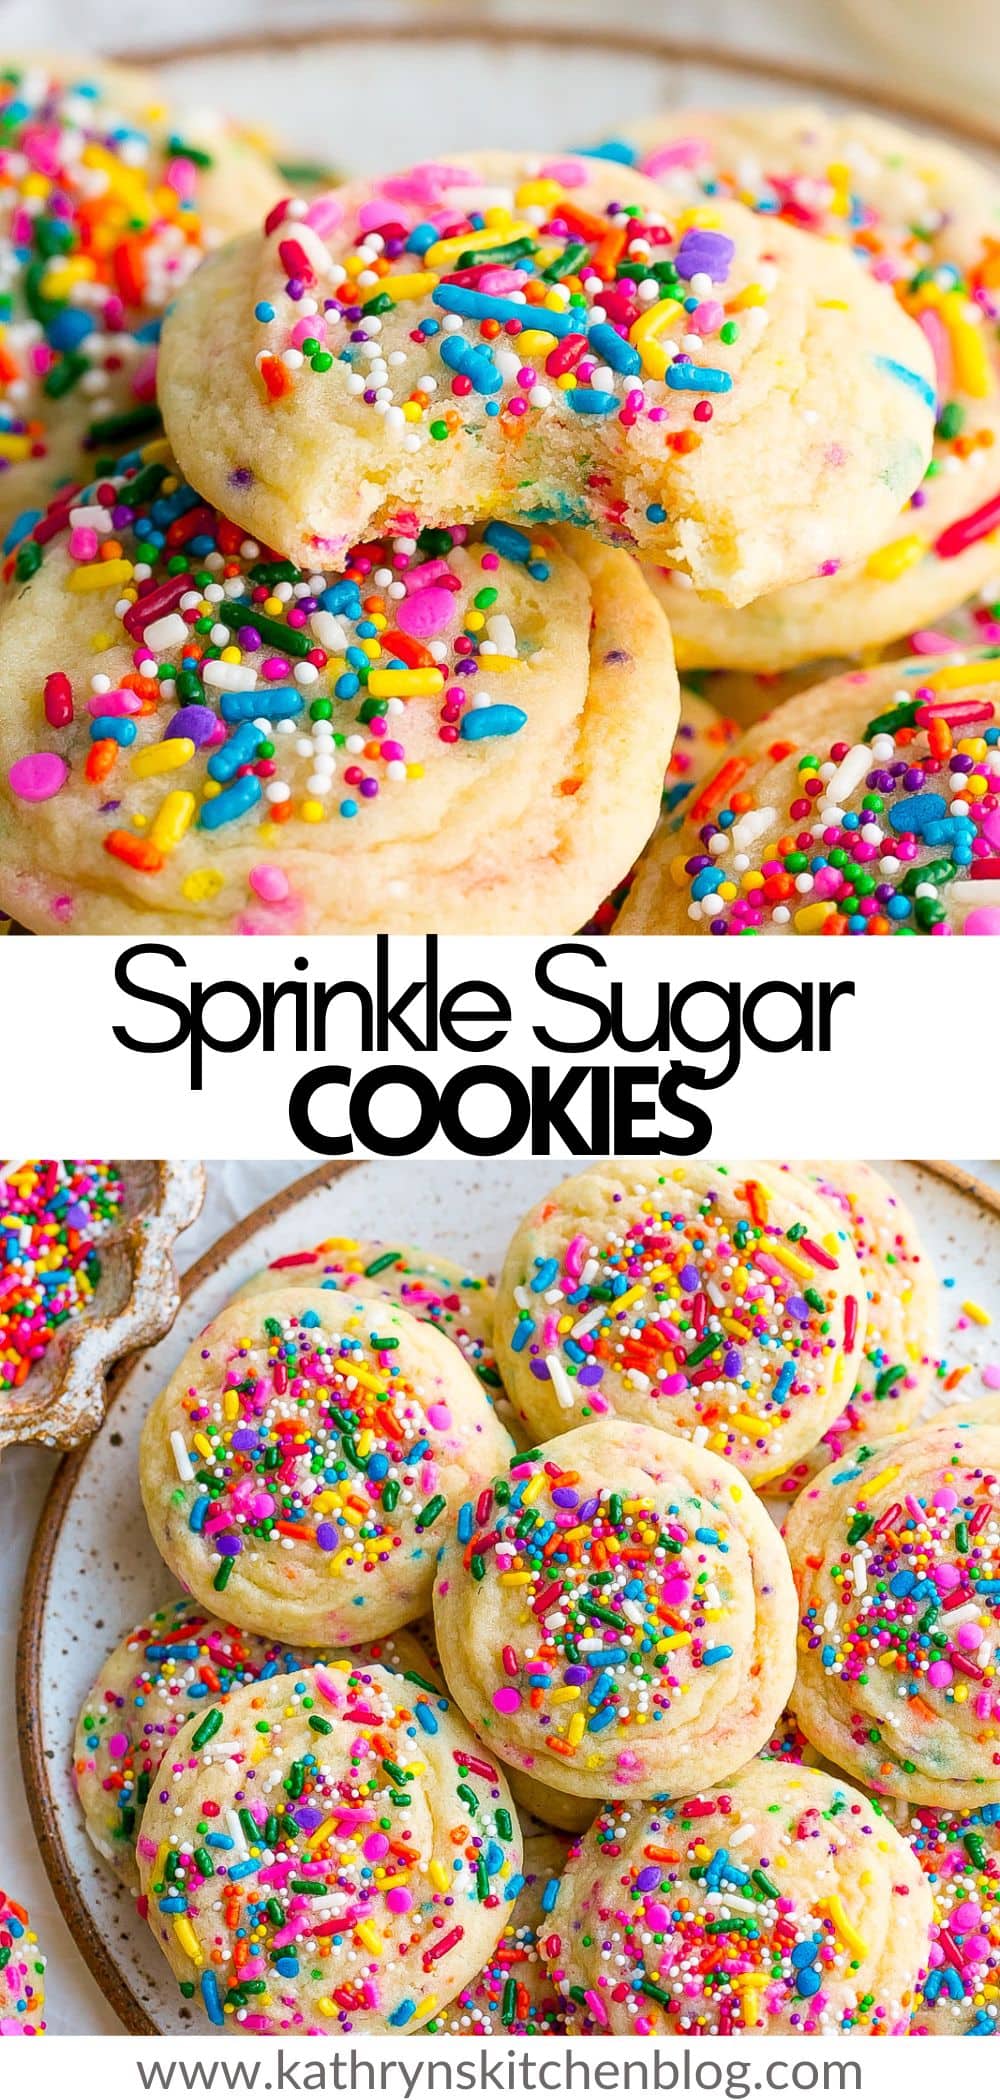 Sprinkle Sugar Cookies (Soft & Chewy)- Kathryn's Kitchen